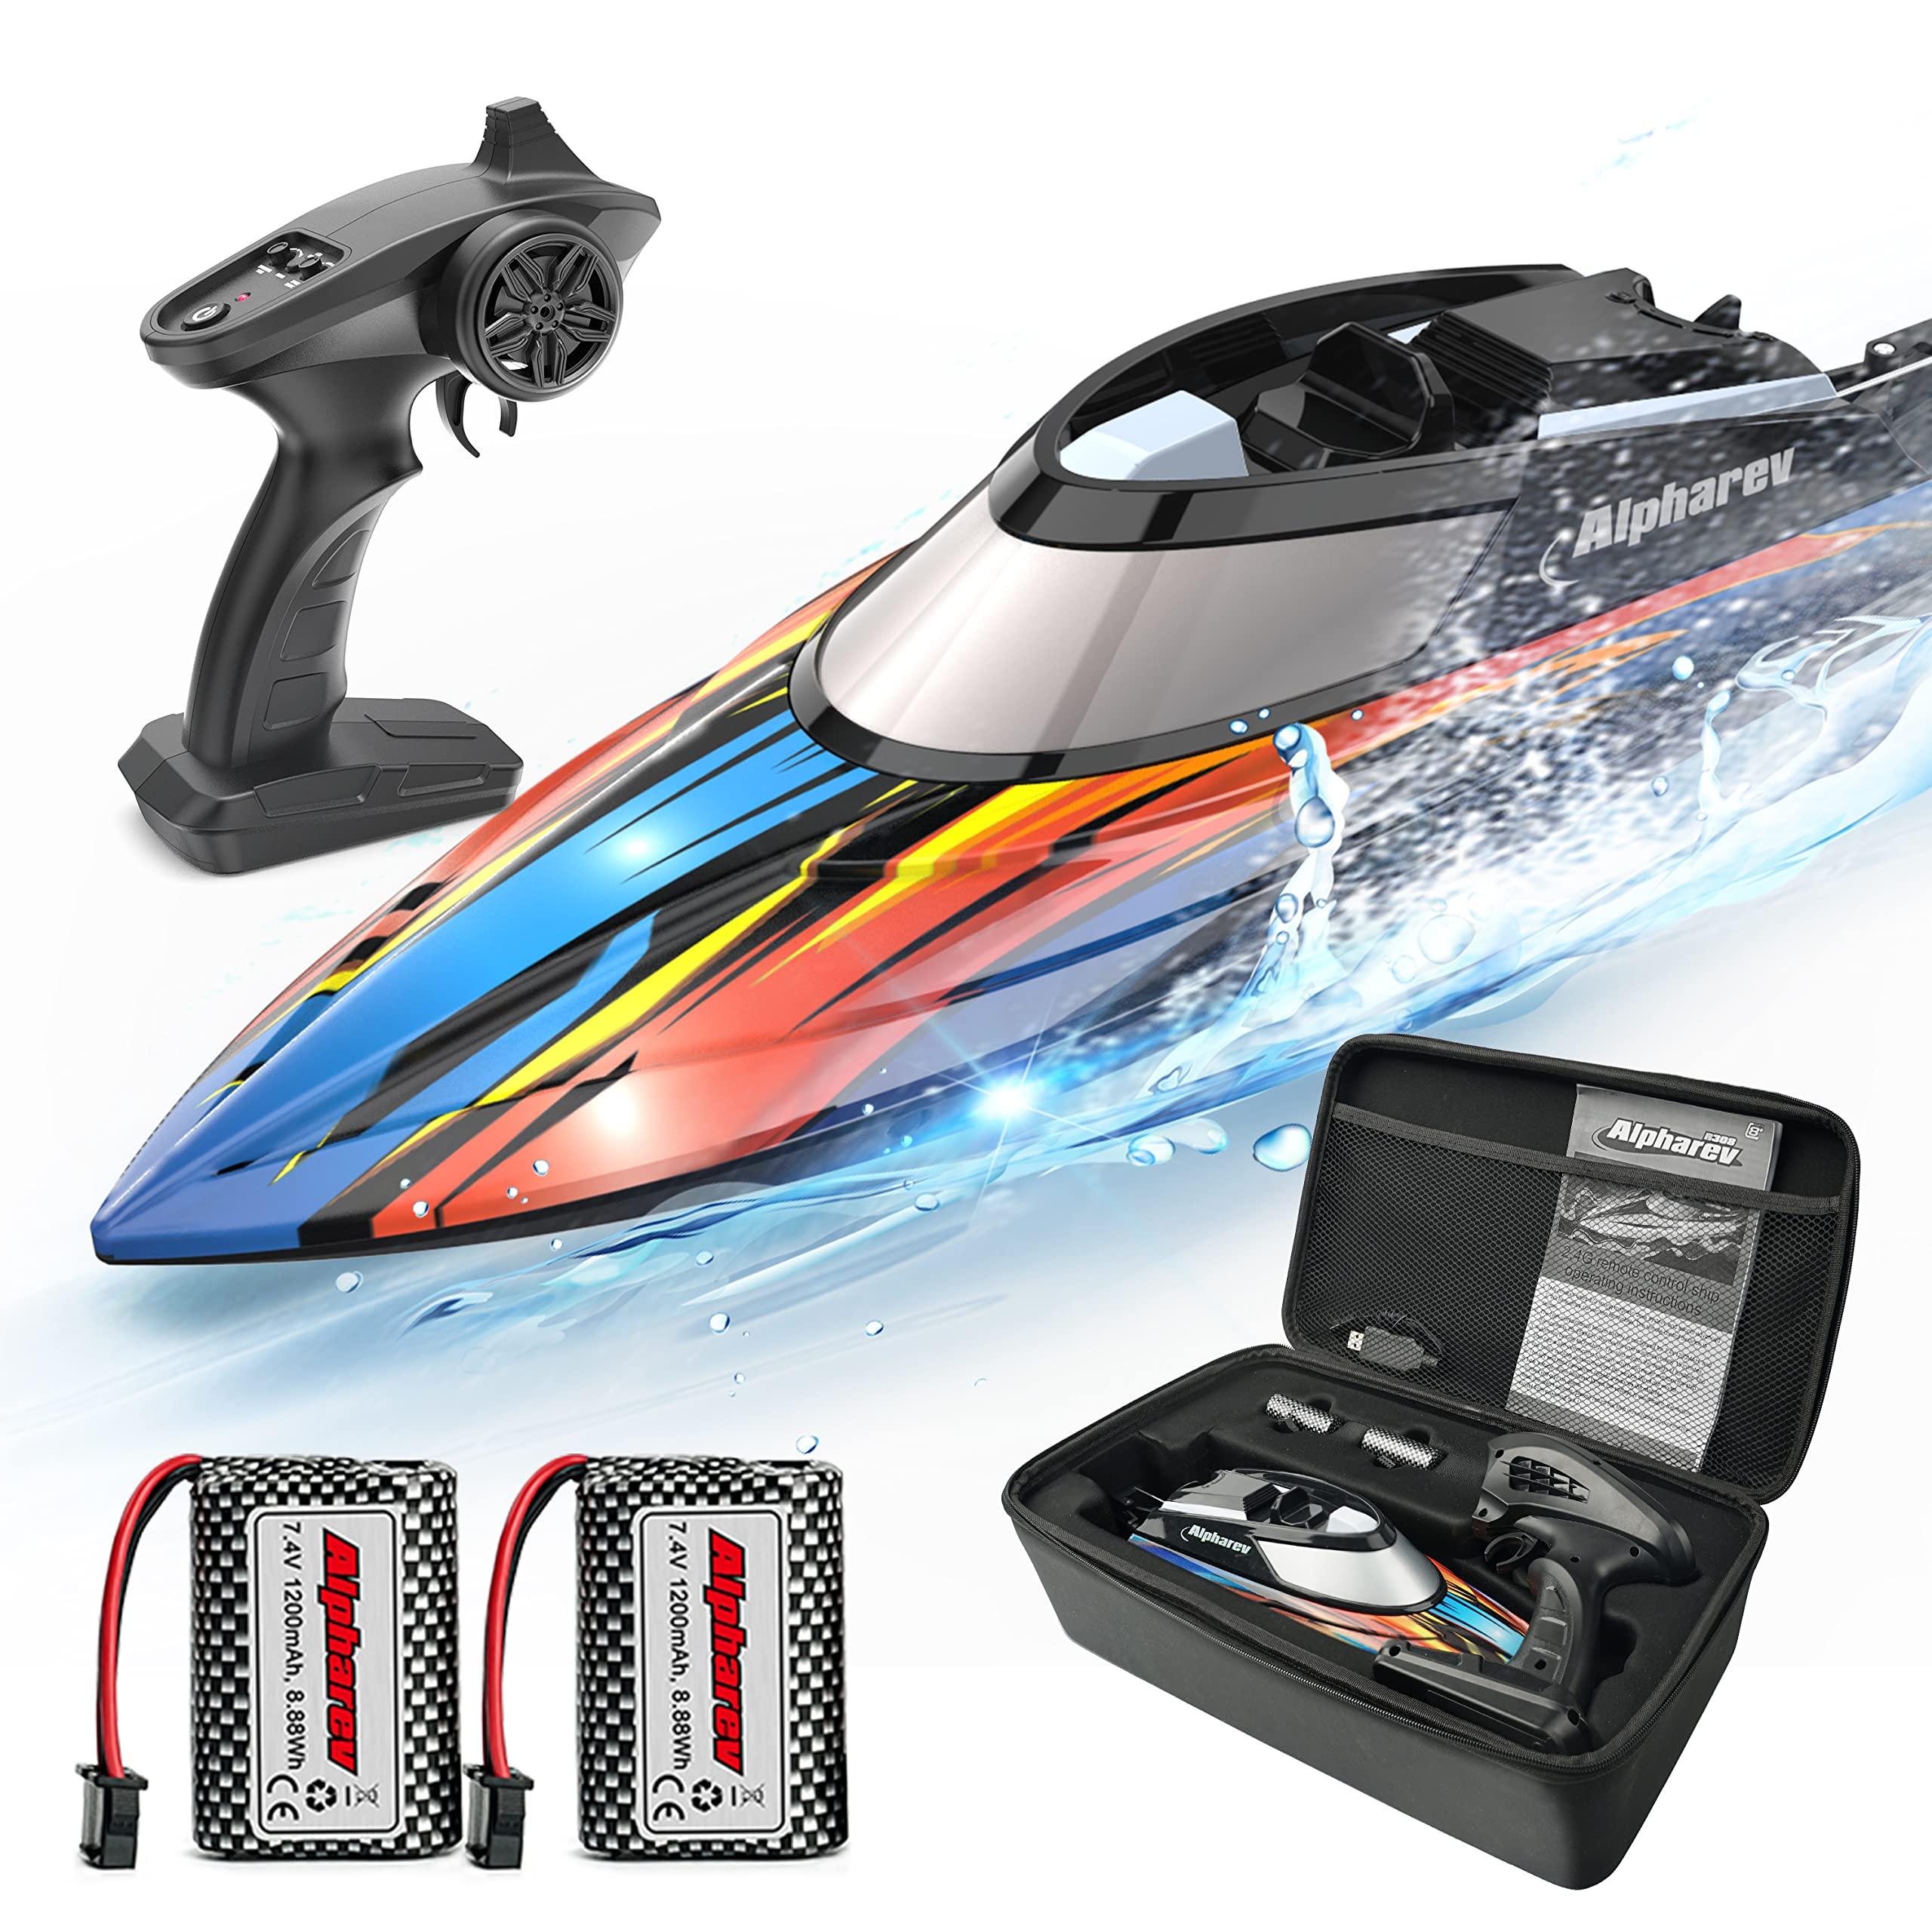 Rc Boat Running Gear: Choosing the Best RC Boat Running Gear: A Comprehensive Guide